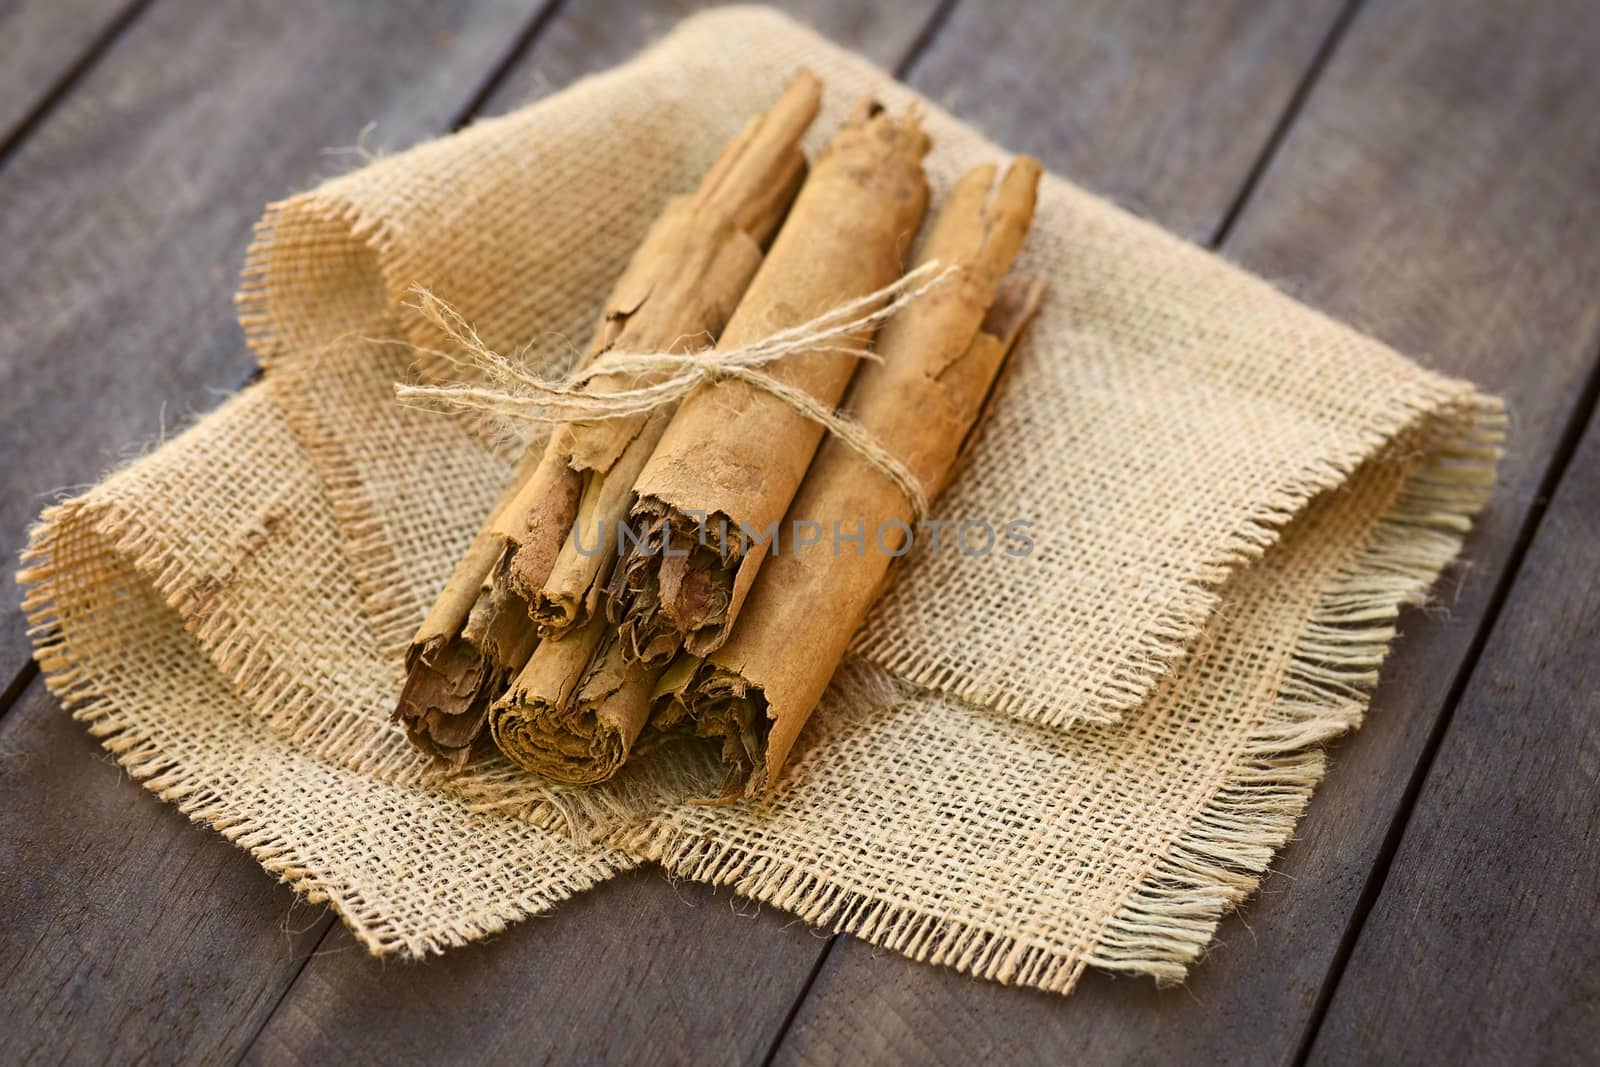 Cinnamon sticks on jute fabric (Selective Focus, Focus on the front of the upper sticks) 